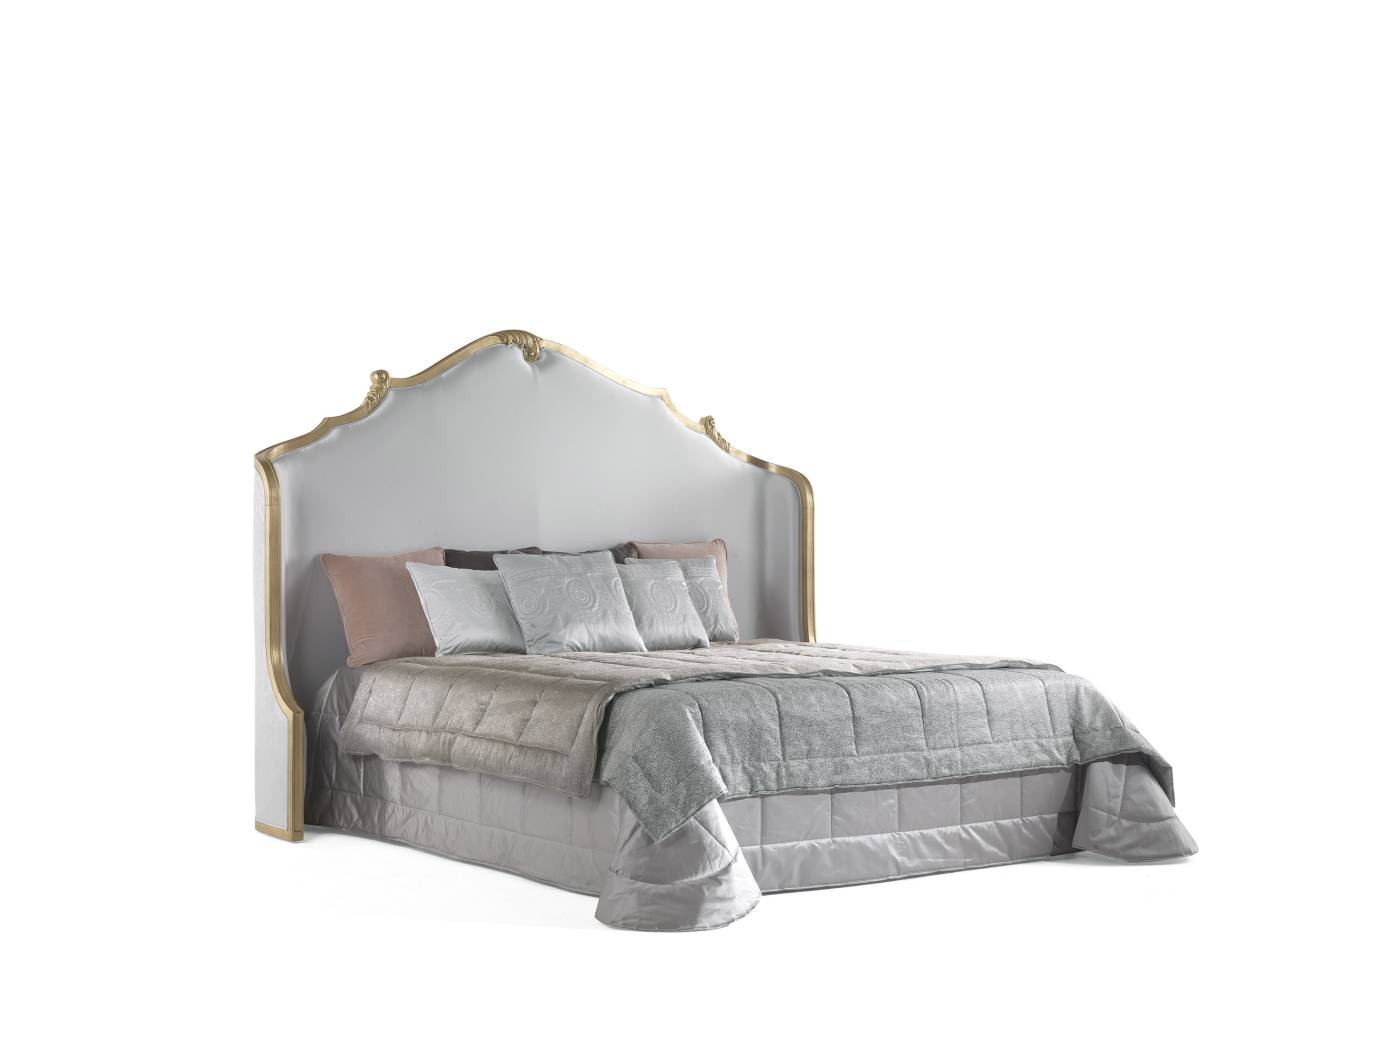 JumboCollection_Annecy_Bed_02.jpg